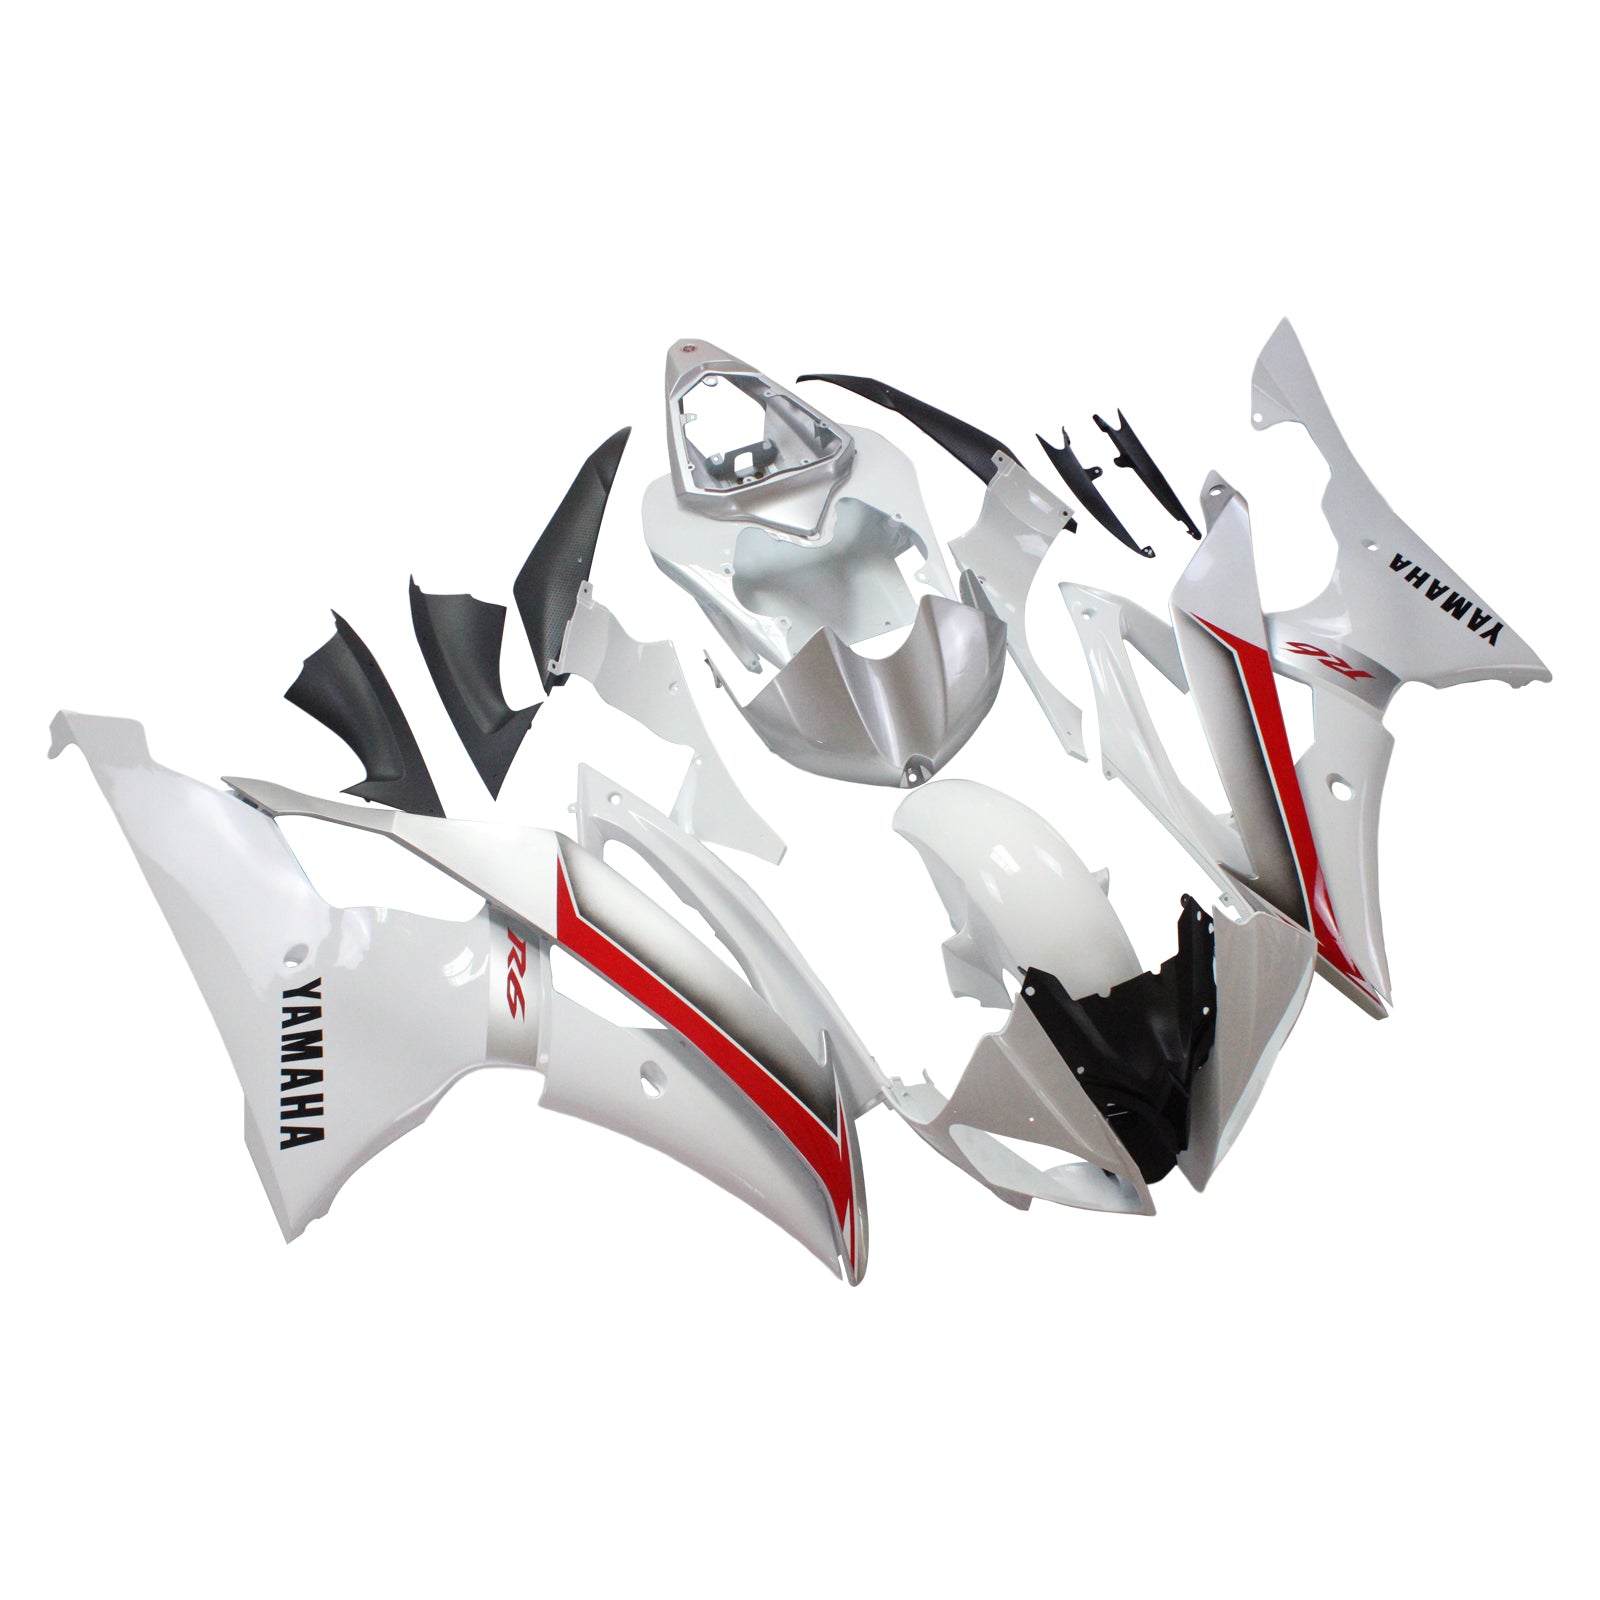 Injection Fairing Kit Bodywork Plastic ABS fit For Yamaha YZF 600 R6 2008-2016